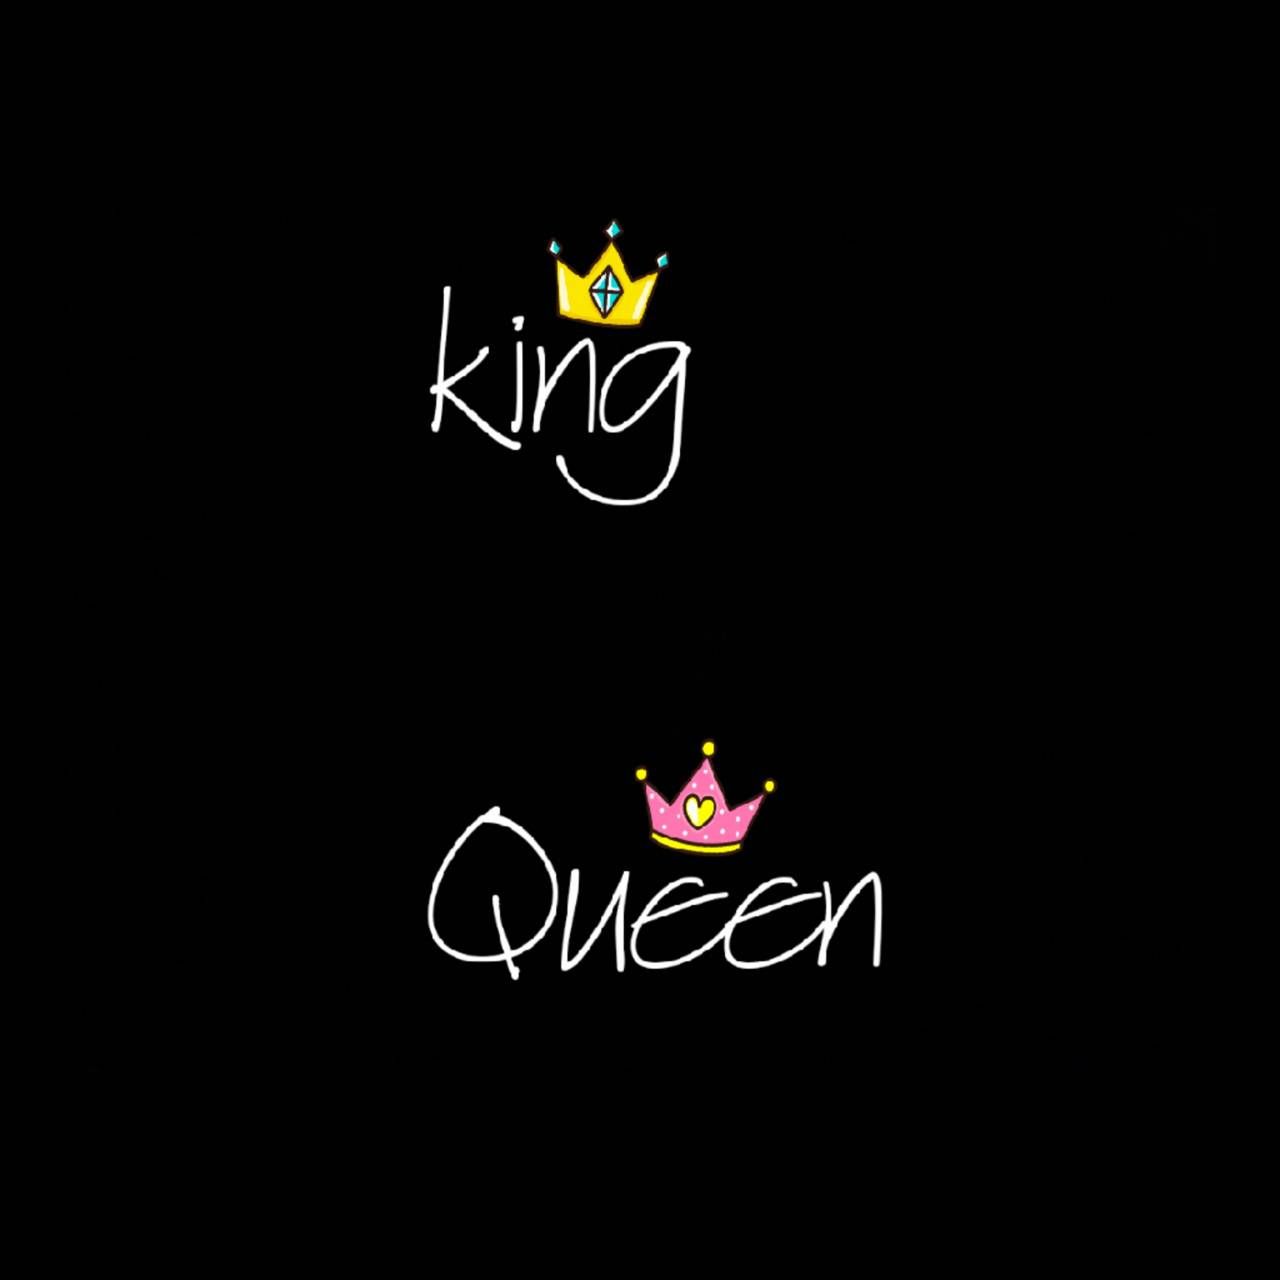 Discover more than 84 king and queen wallpaper latest - in.cdgdbentre